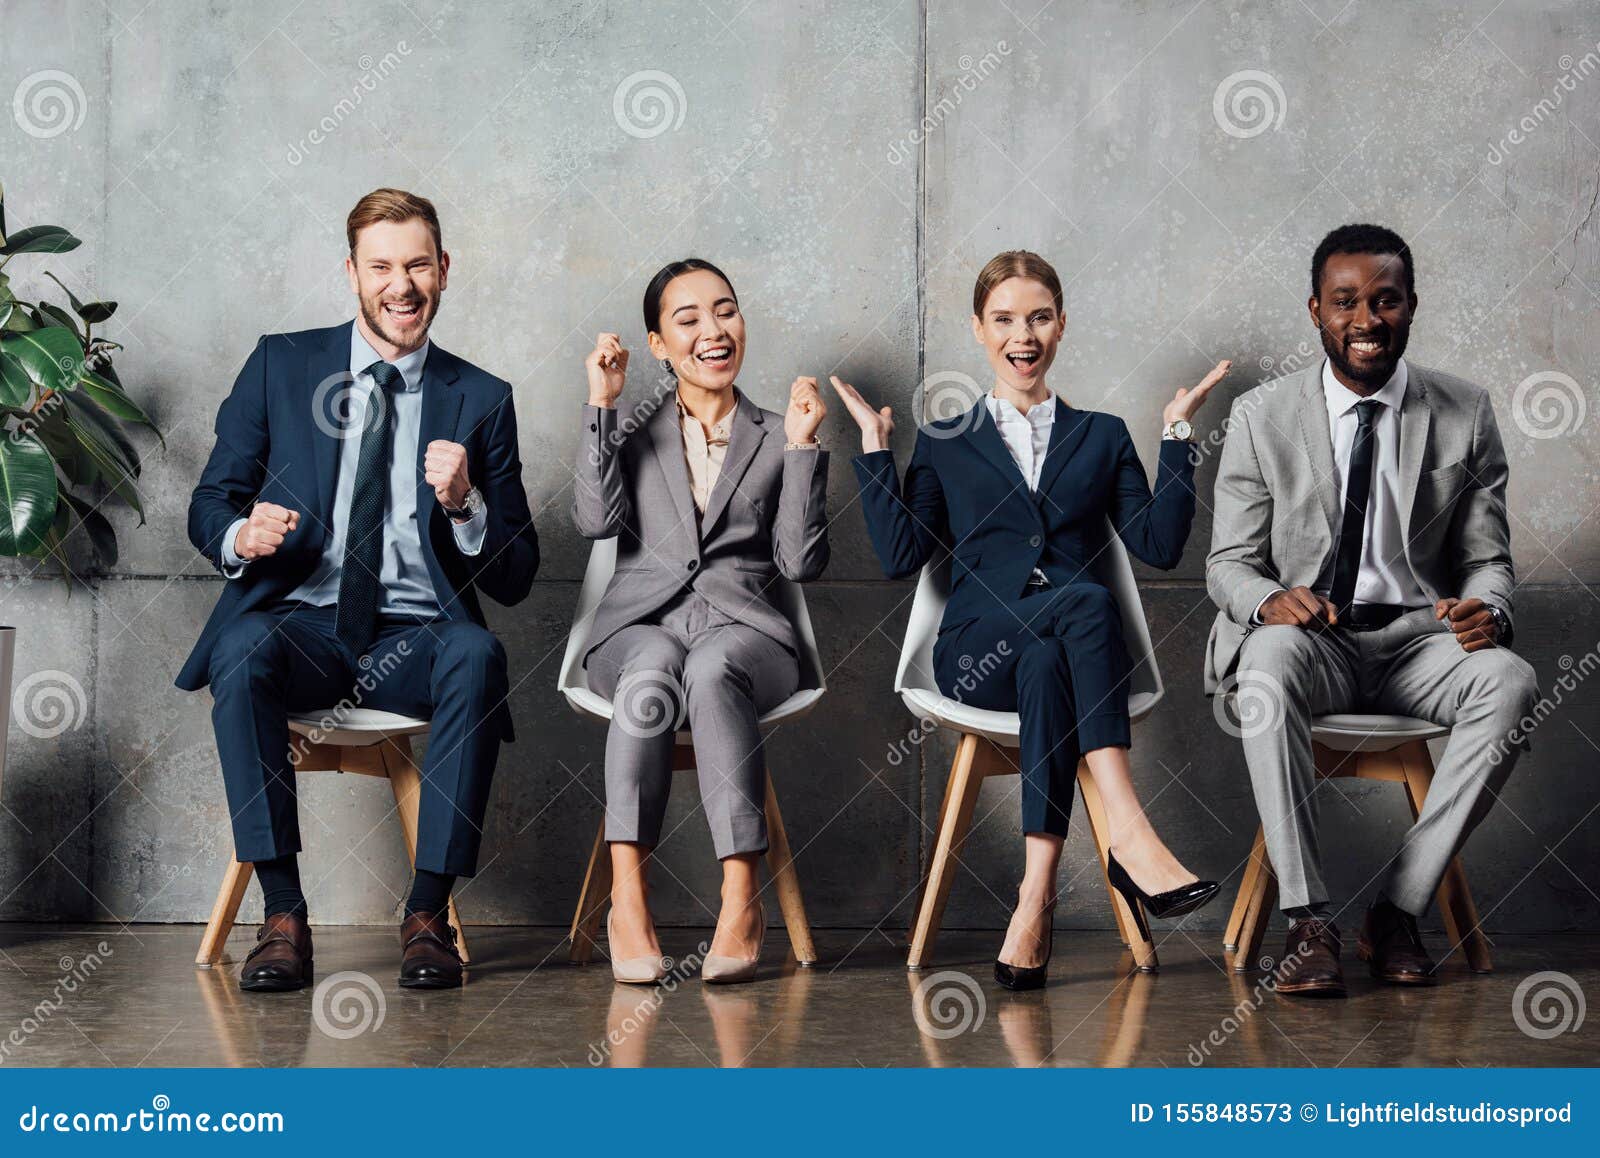 happy multiethnic businesspeople sitting on chairs and cheering with clenched fists in